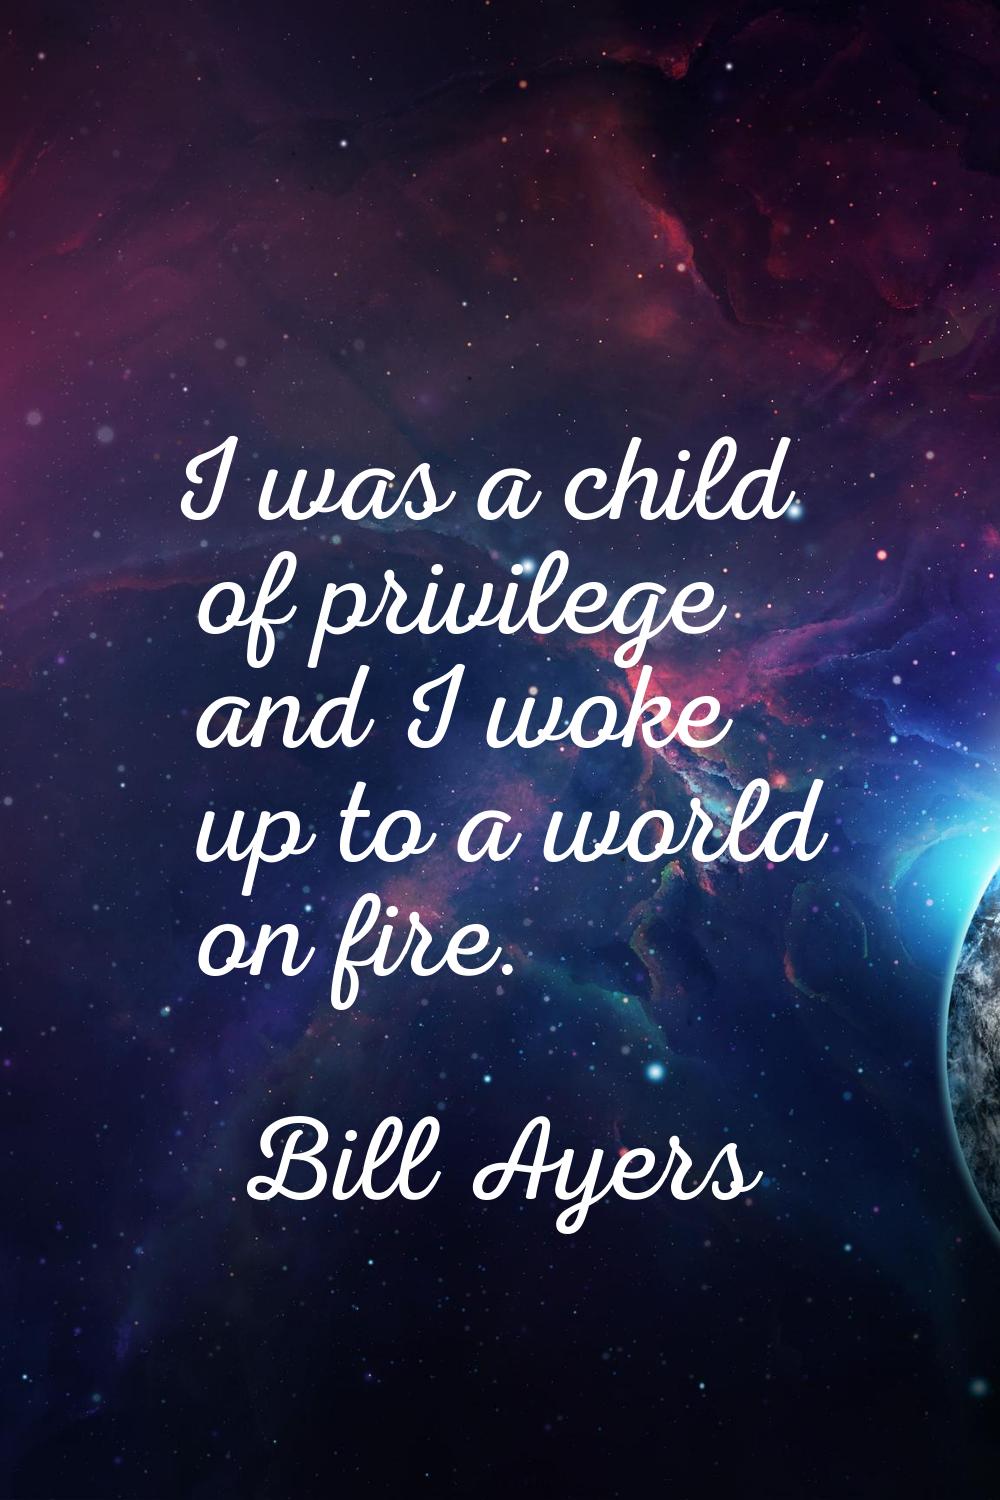 I was a child of privilege and I woke up to a world on fire.